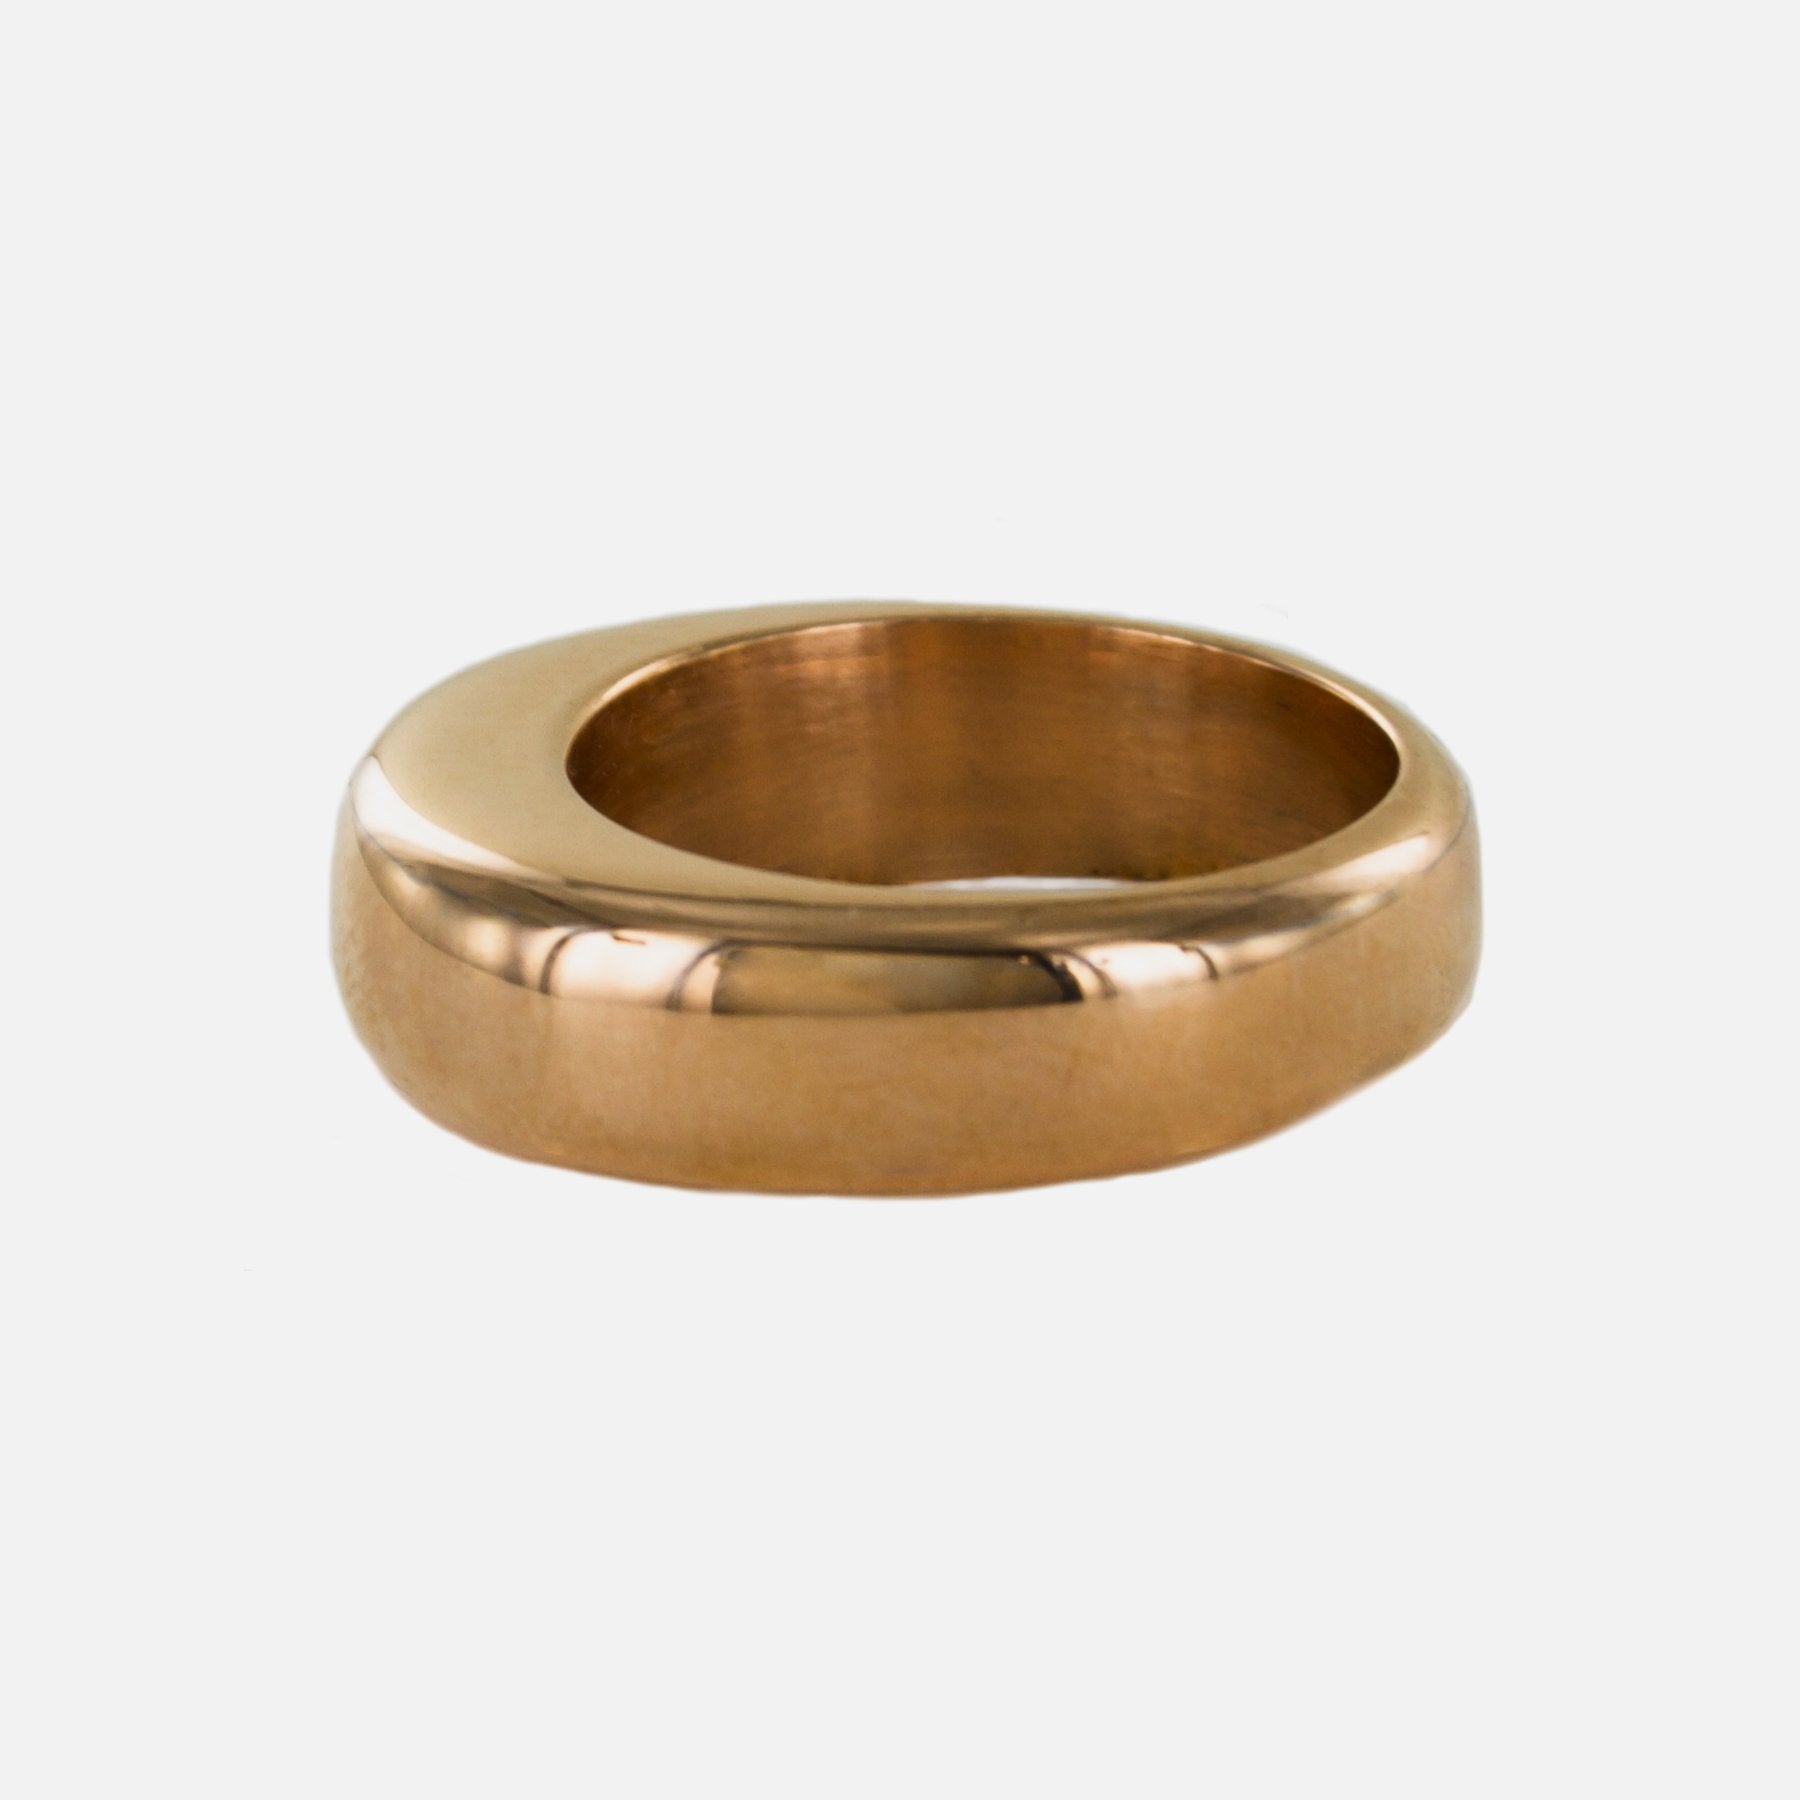 Hollow Copper Ring - 6